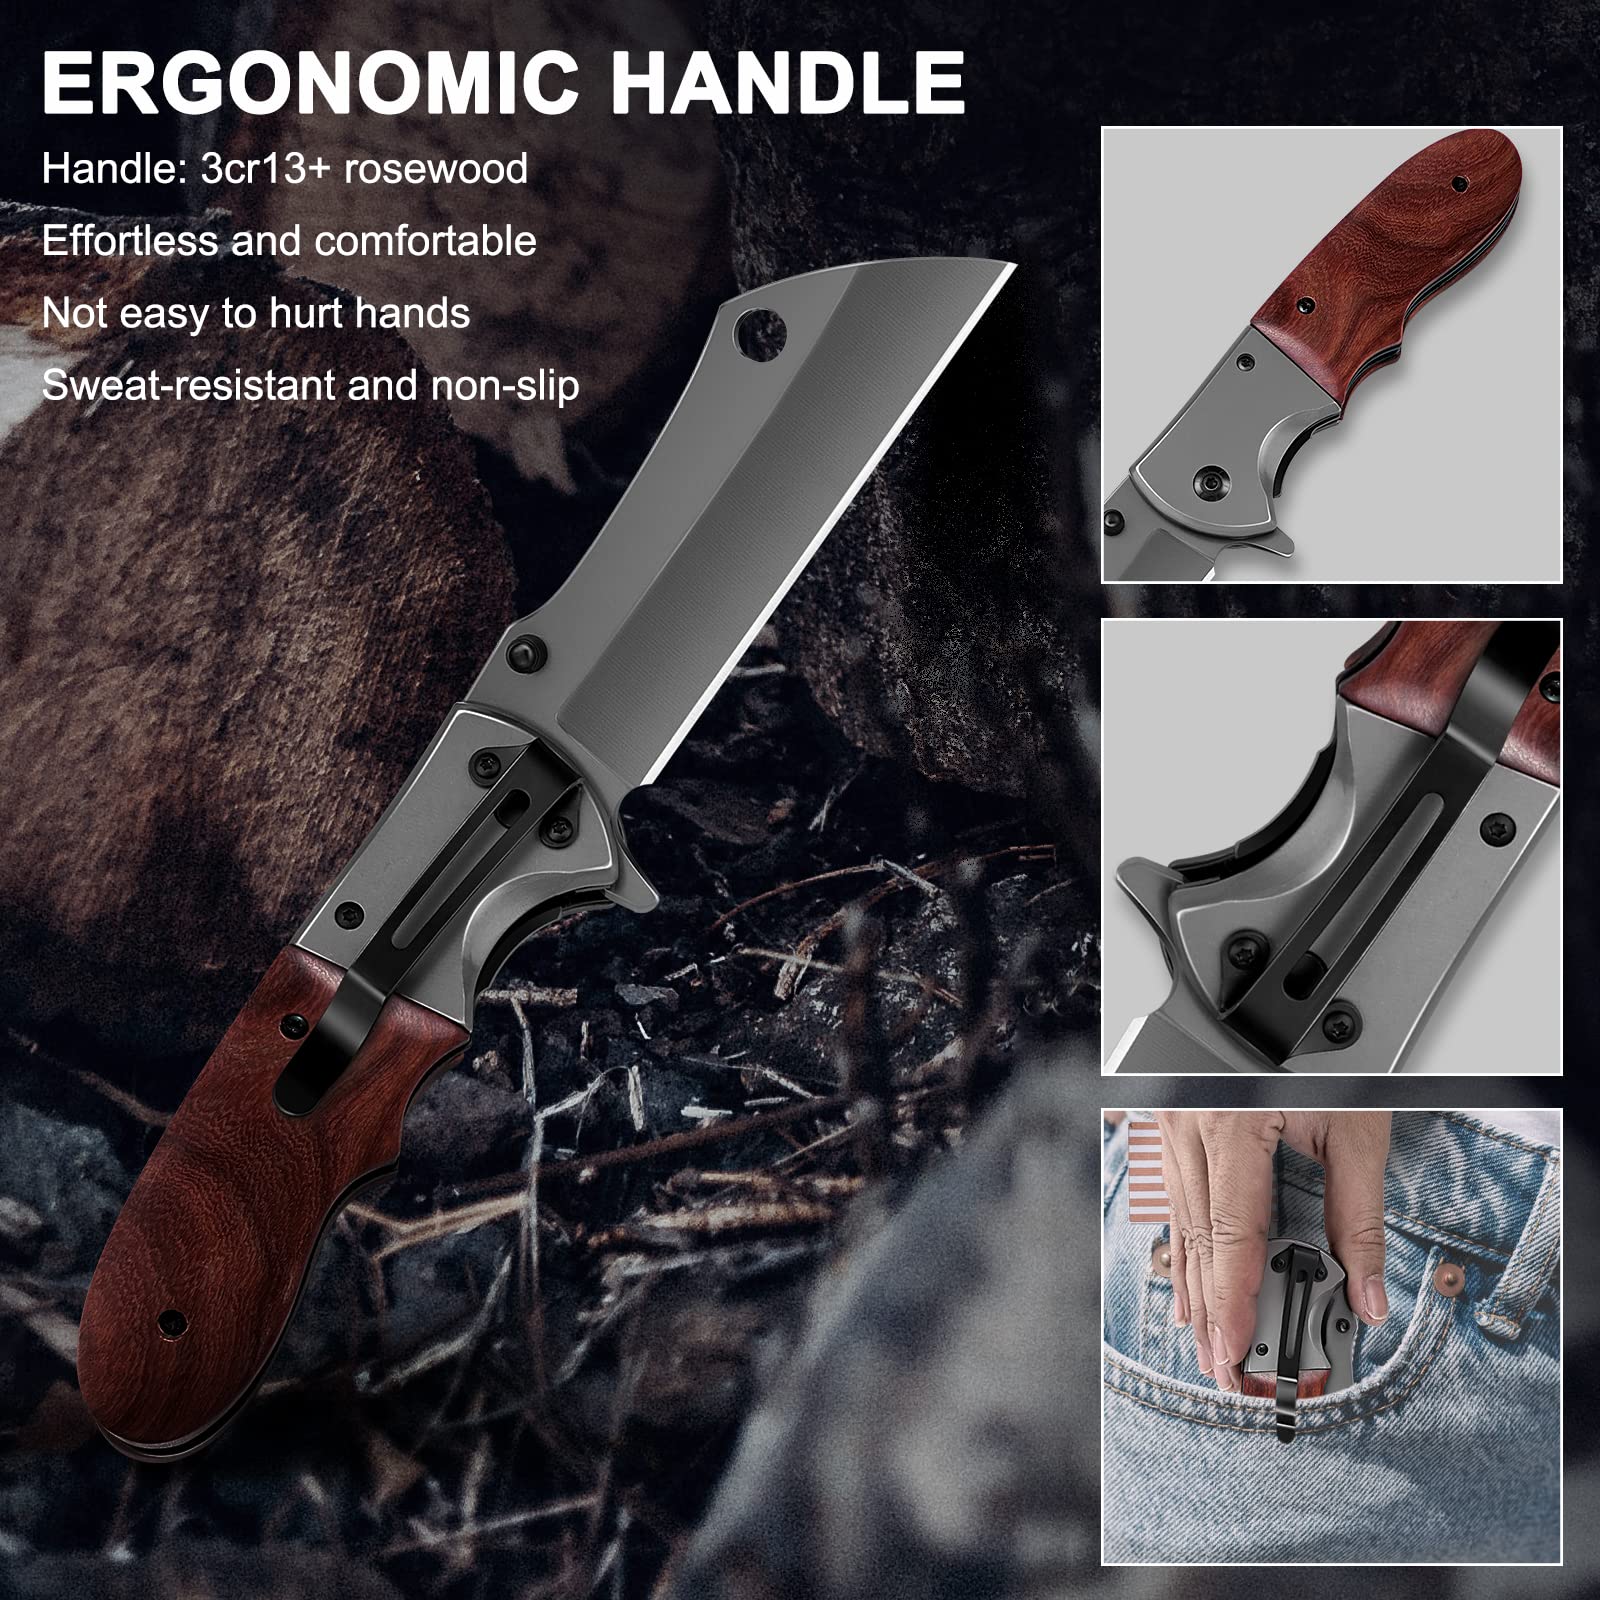 Zxcan Pocket Knife, Folding Knife 5CR13 Carbon Steel Stainless Blade, EDC Knife with Liner Lock, Pocket clip, Tactical Knife for Camping Indoor and Outdoor Activities Men Gift